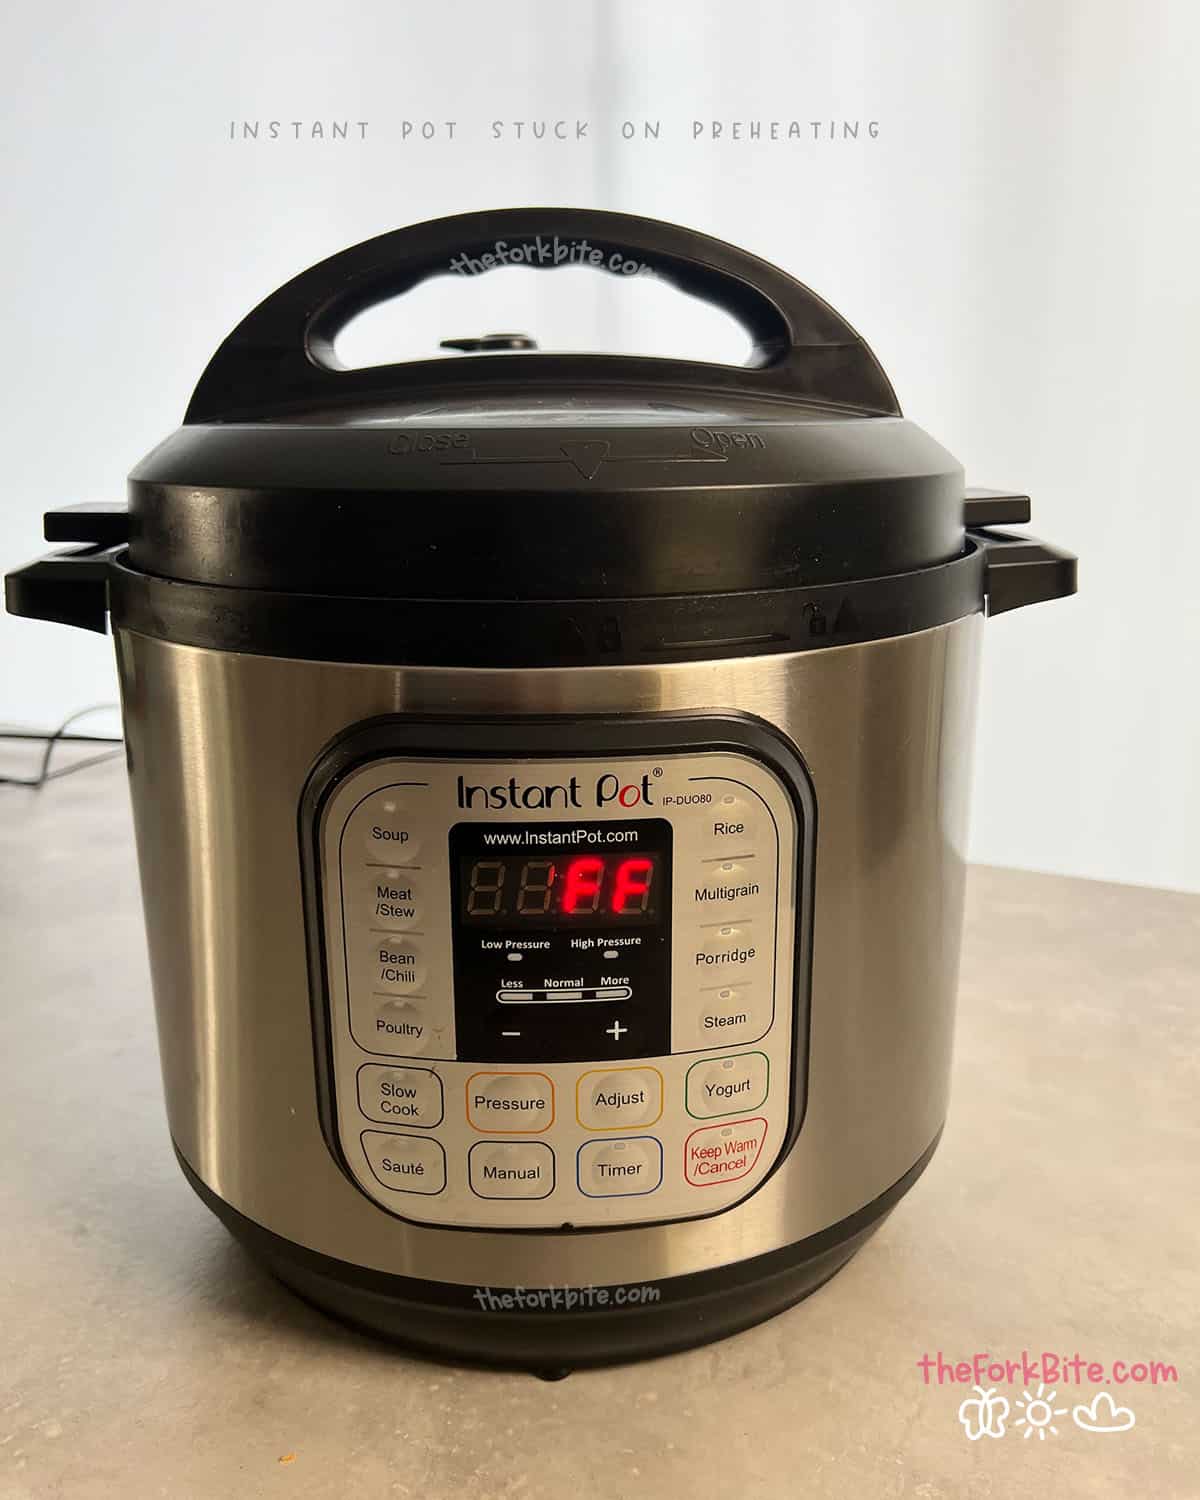 Are you having trouble with your Instant Pot stuck on preheating? In this post, we'll show you how to get your Instant Pot up and running in no time.